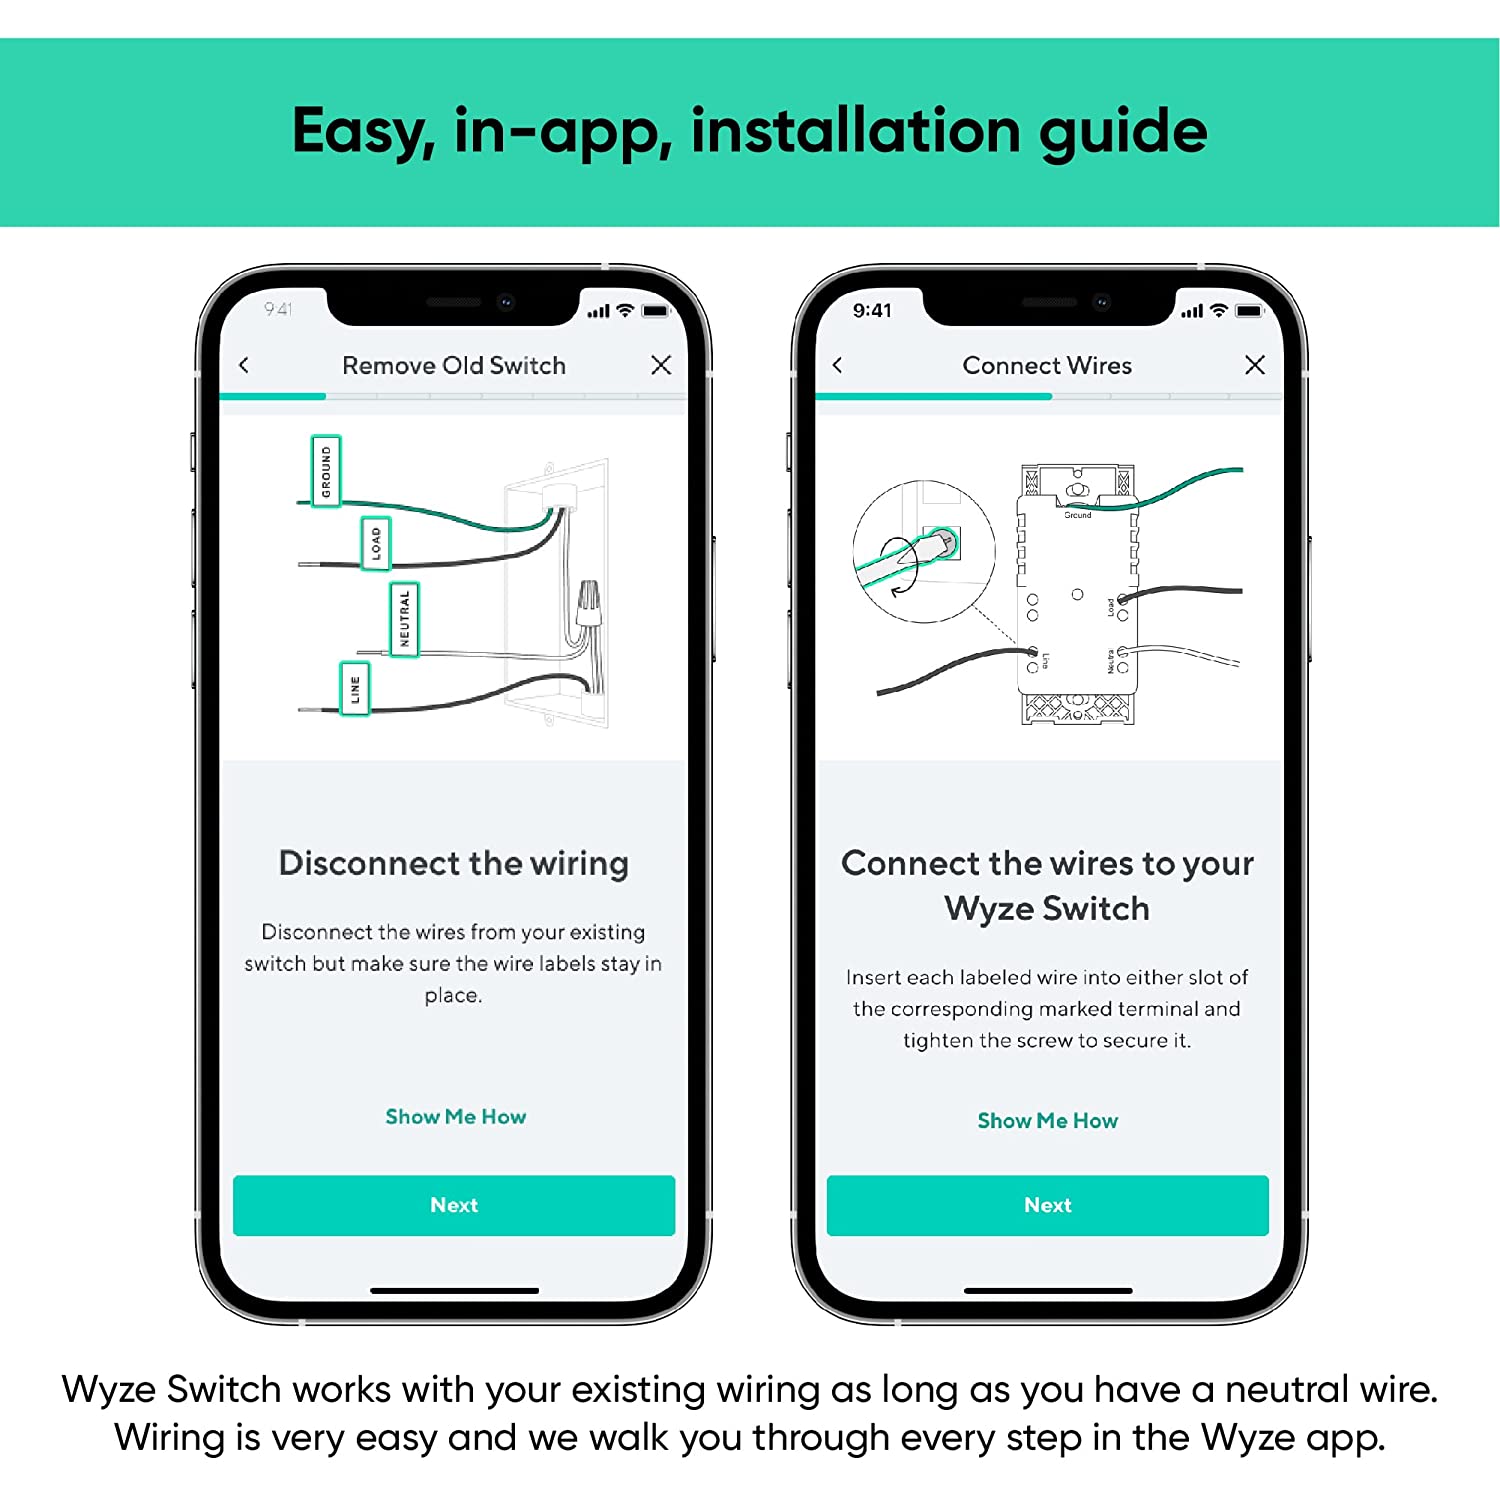 wyze scale x guide - Apps on Google Play